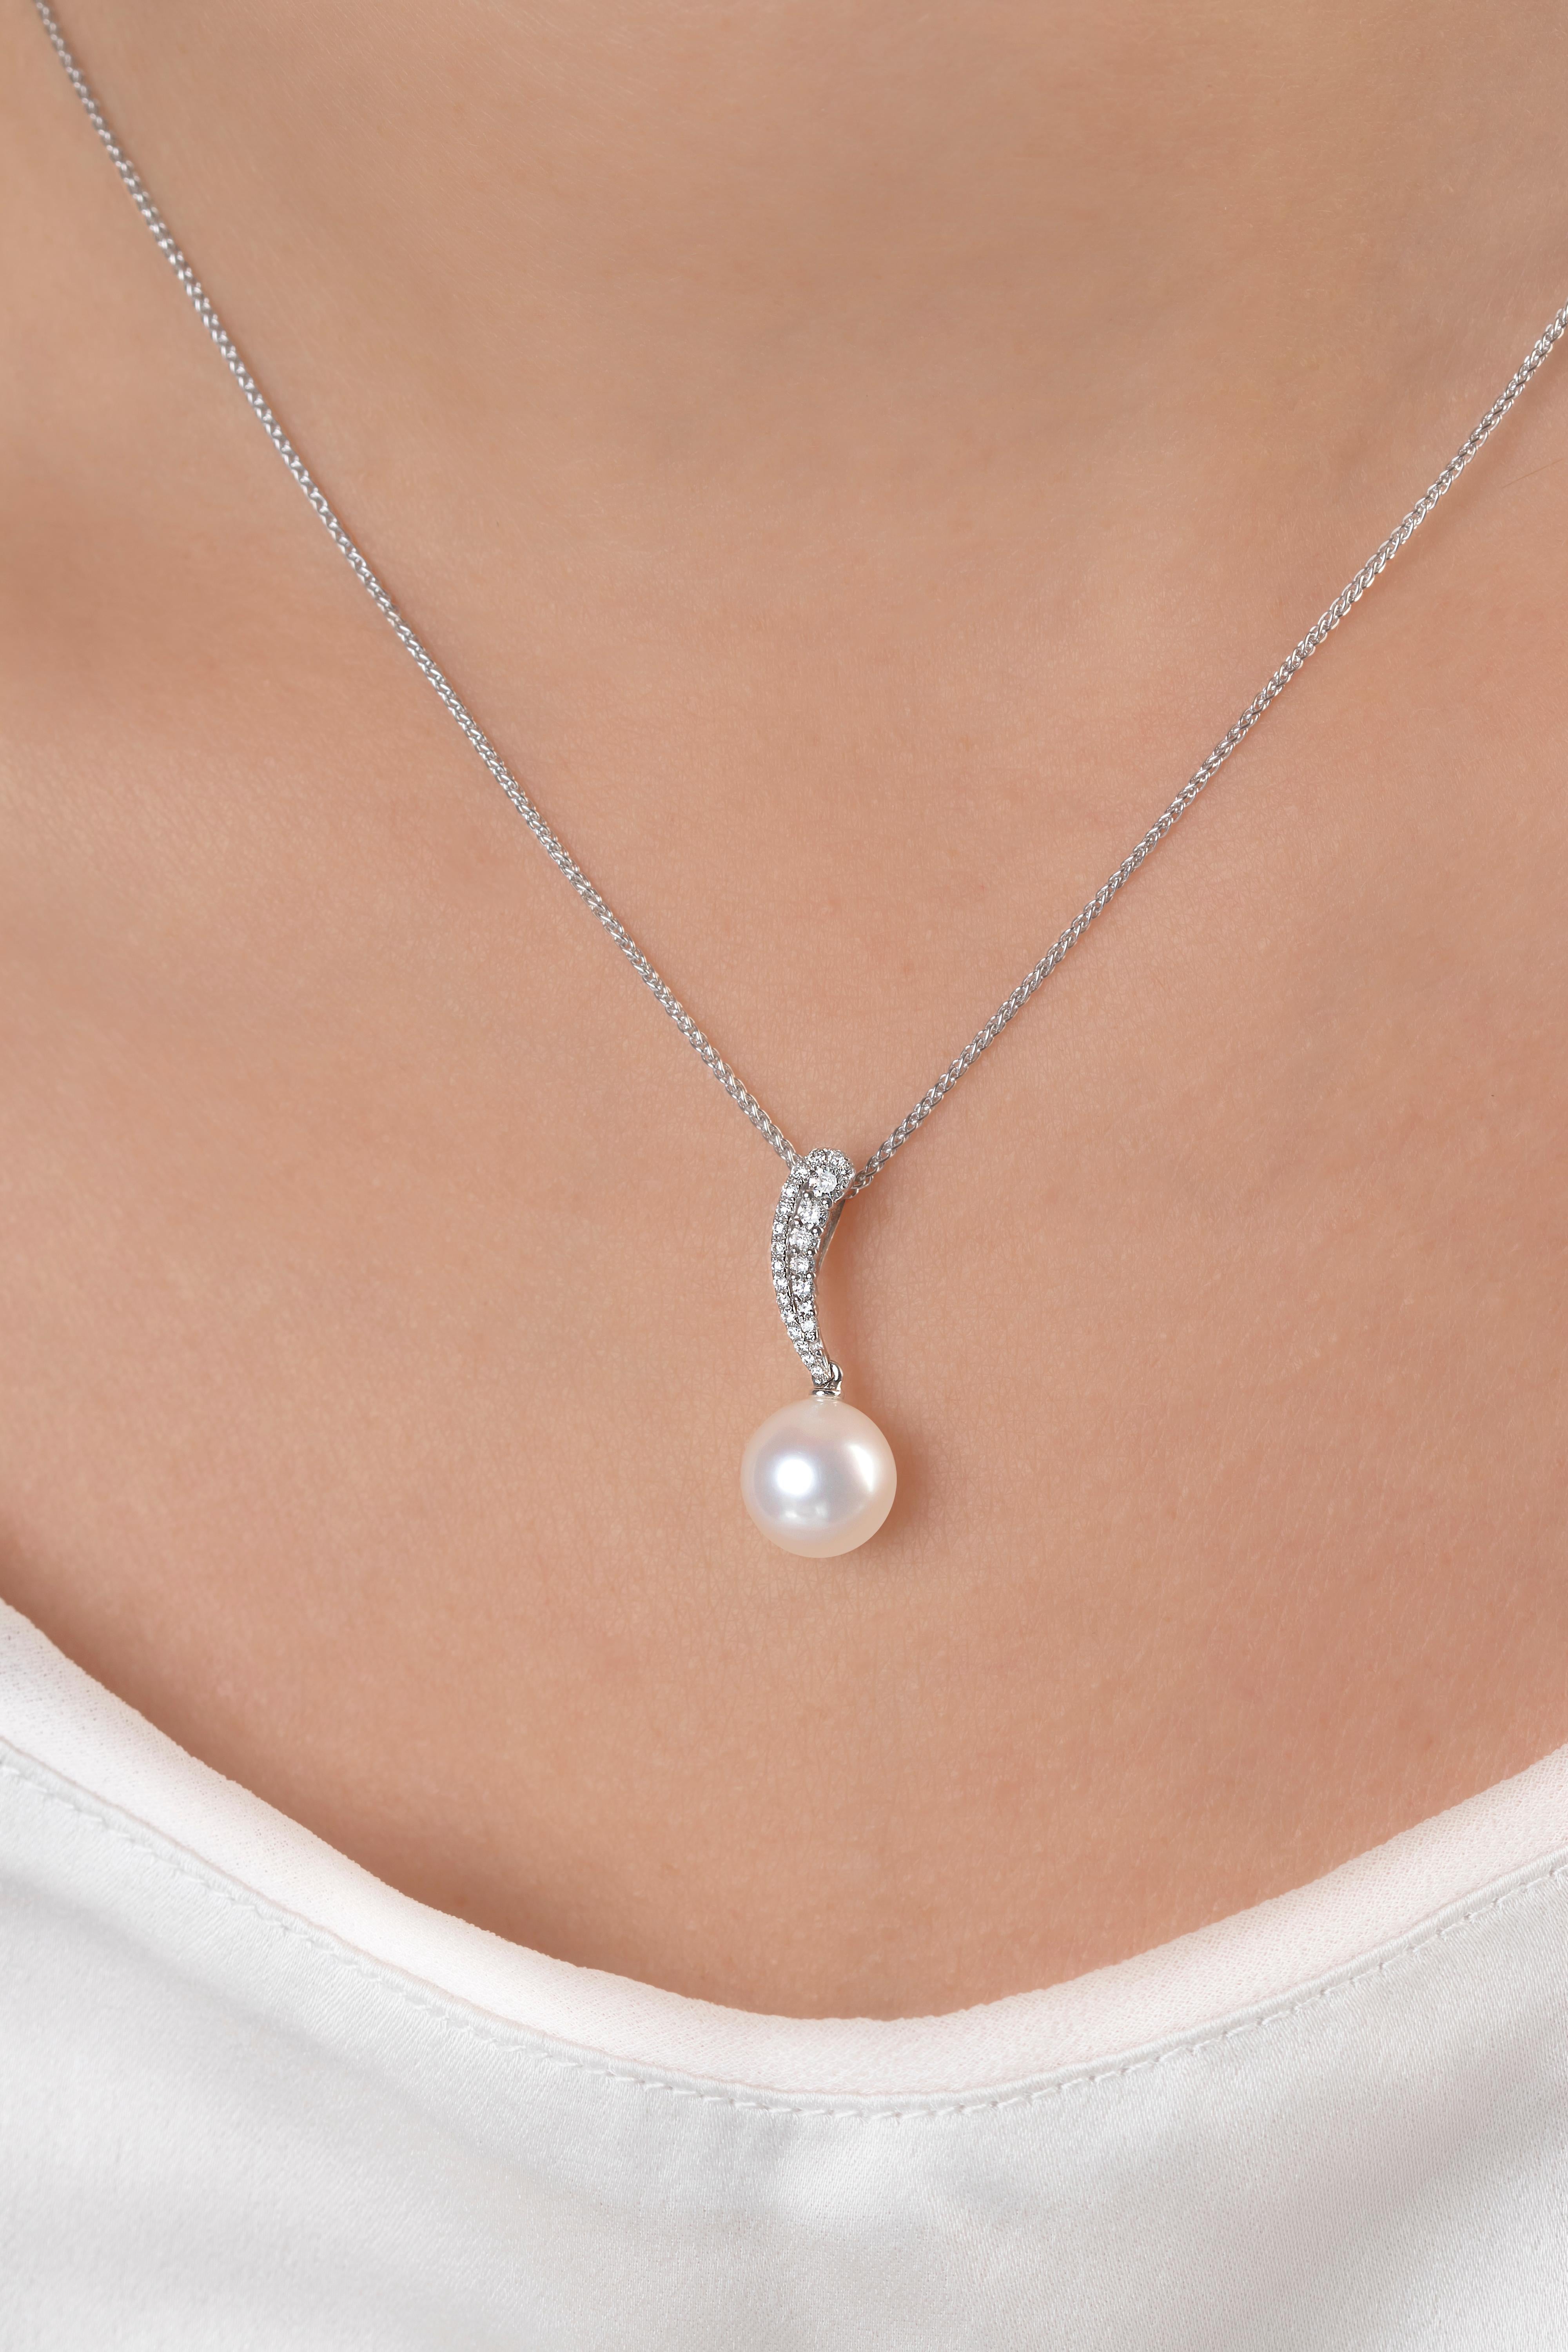 This elegant pendant by Yoko London features a lustrous 8.5mm Freshwater pearl beneath a smooth curve of diamonds. Timeless and elegant, this lovely pendant would make a fantastic addition to any jewellery collection. 
- 8.5mm Freshwater Pearl 
- 23